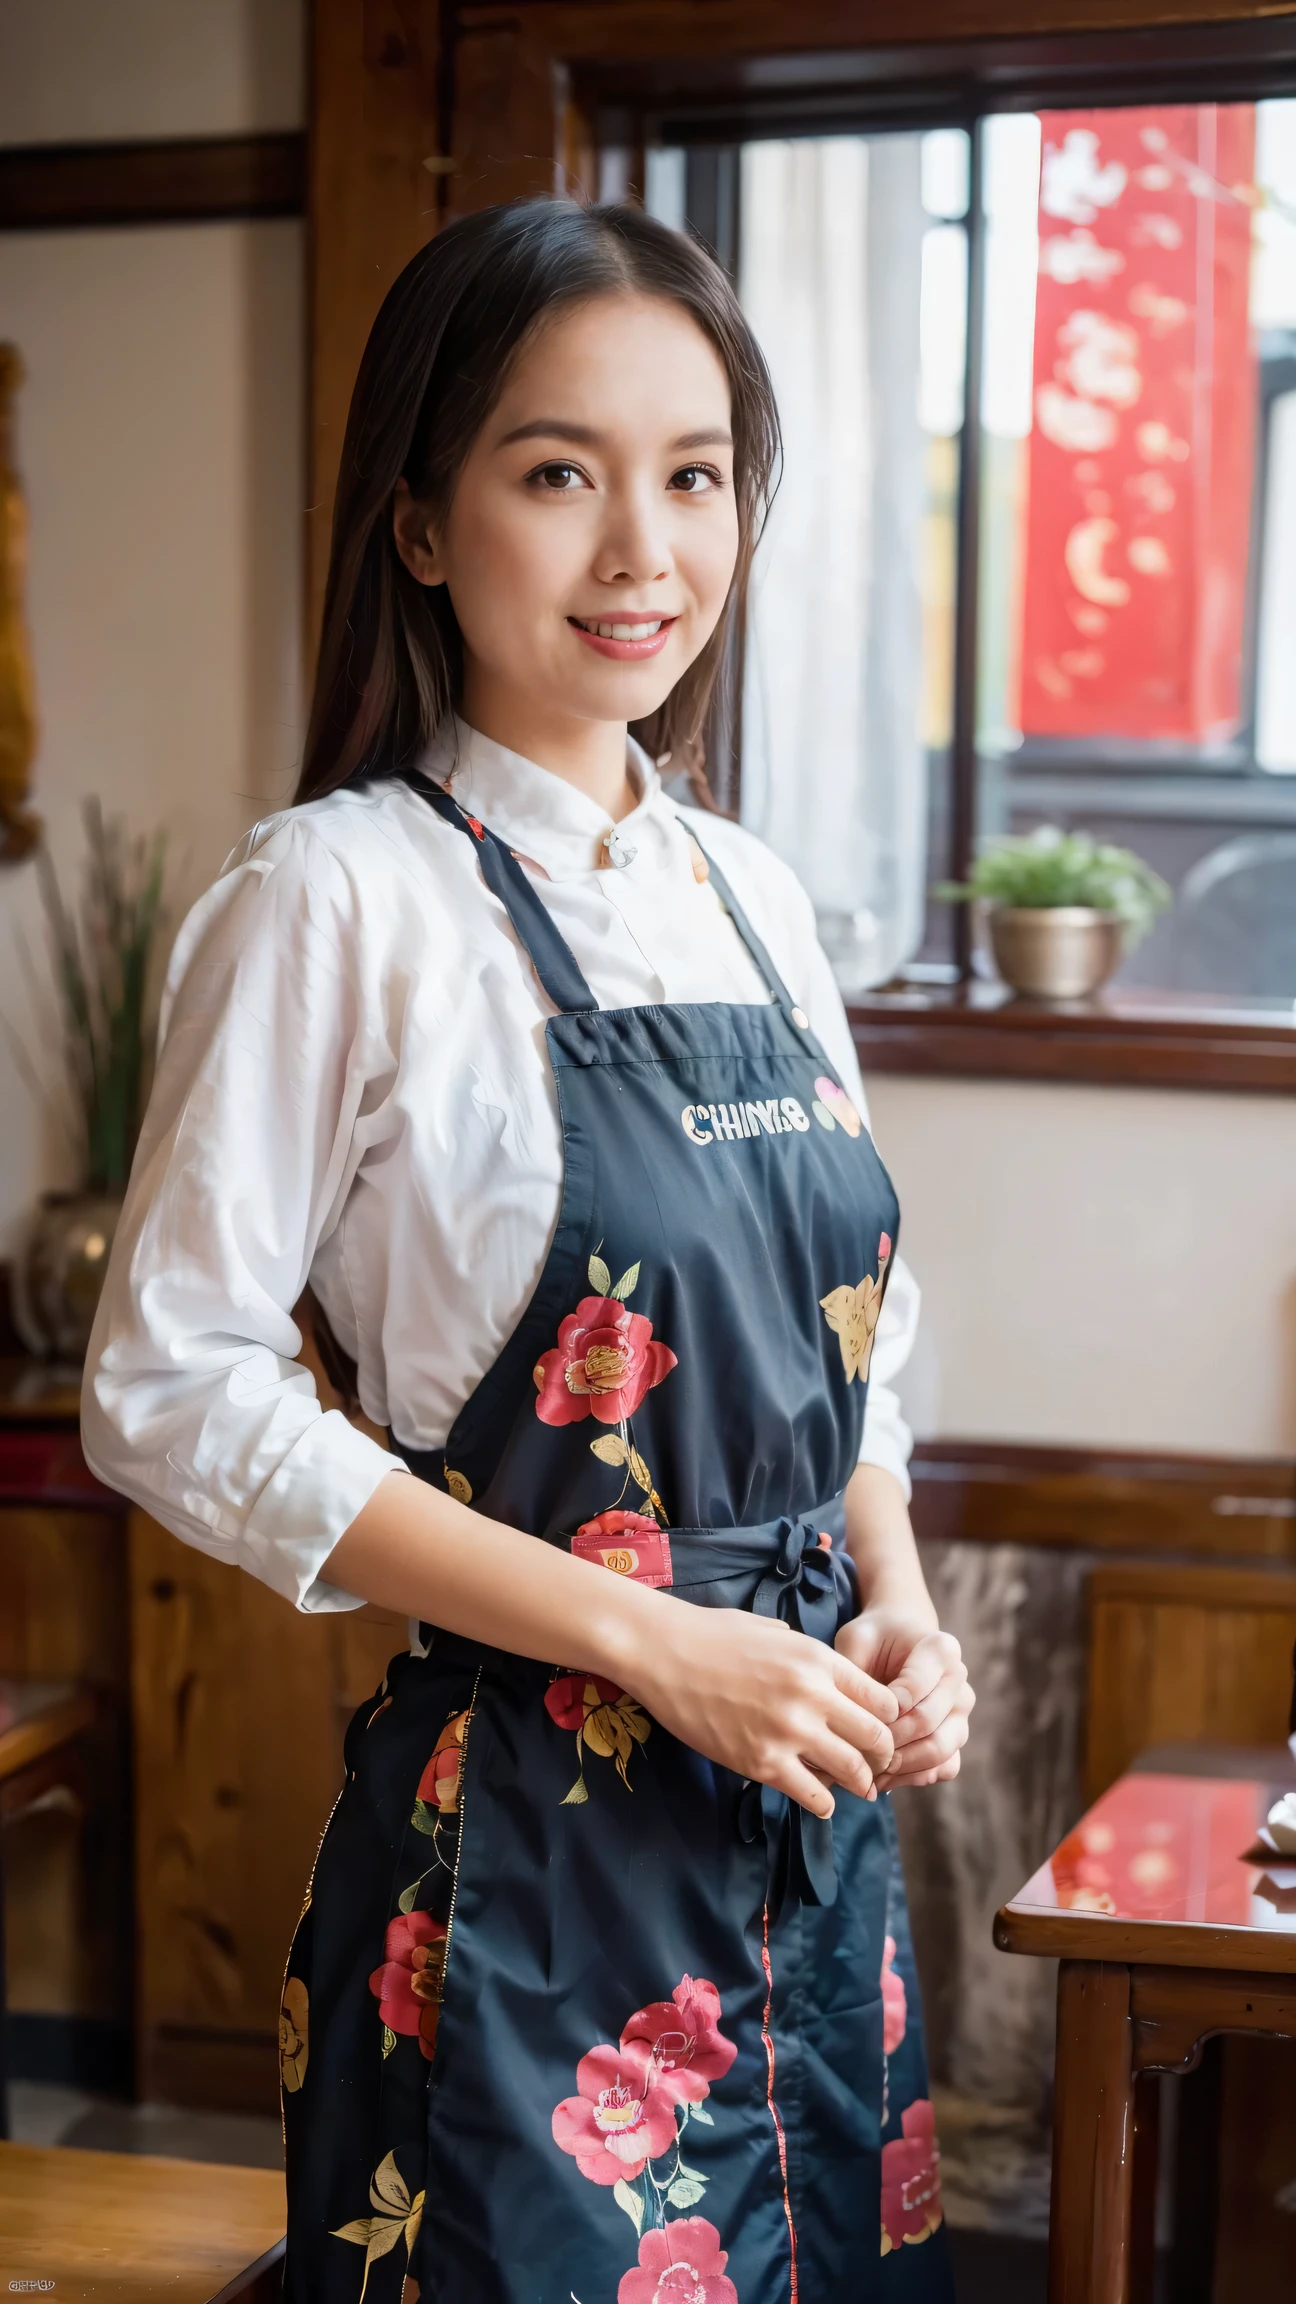 （Super fine，fidelity：1.37），portrait，Chinese restaurant owner，black hair，brown eyes，delicate lips，Put on an apron，confident smile，Neat appearance，Chinese traditional spring clothing，floral pattern，Standing in a brightly lit restaurant，antique wooden furniture，Elaborately carved decoration，Chinese traditional elements，Beautifully painted porcelain plates and teapots，Authentic Chinese cuisine，Vibrant color palette，Defocused lights in the background create a warm and inviting atmosphere